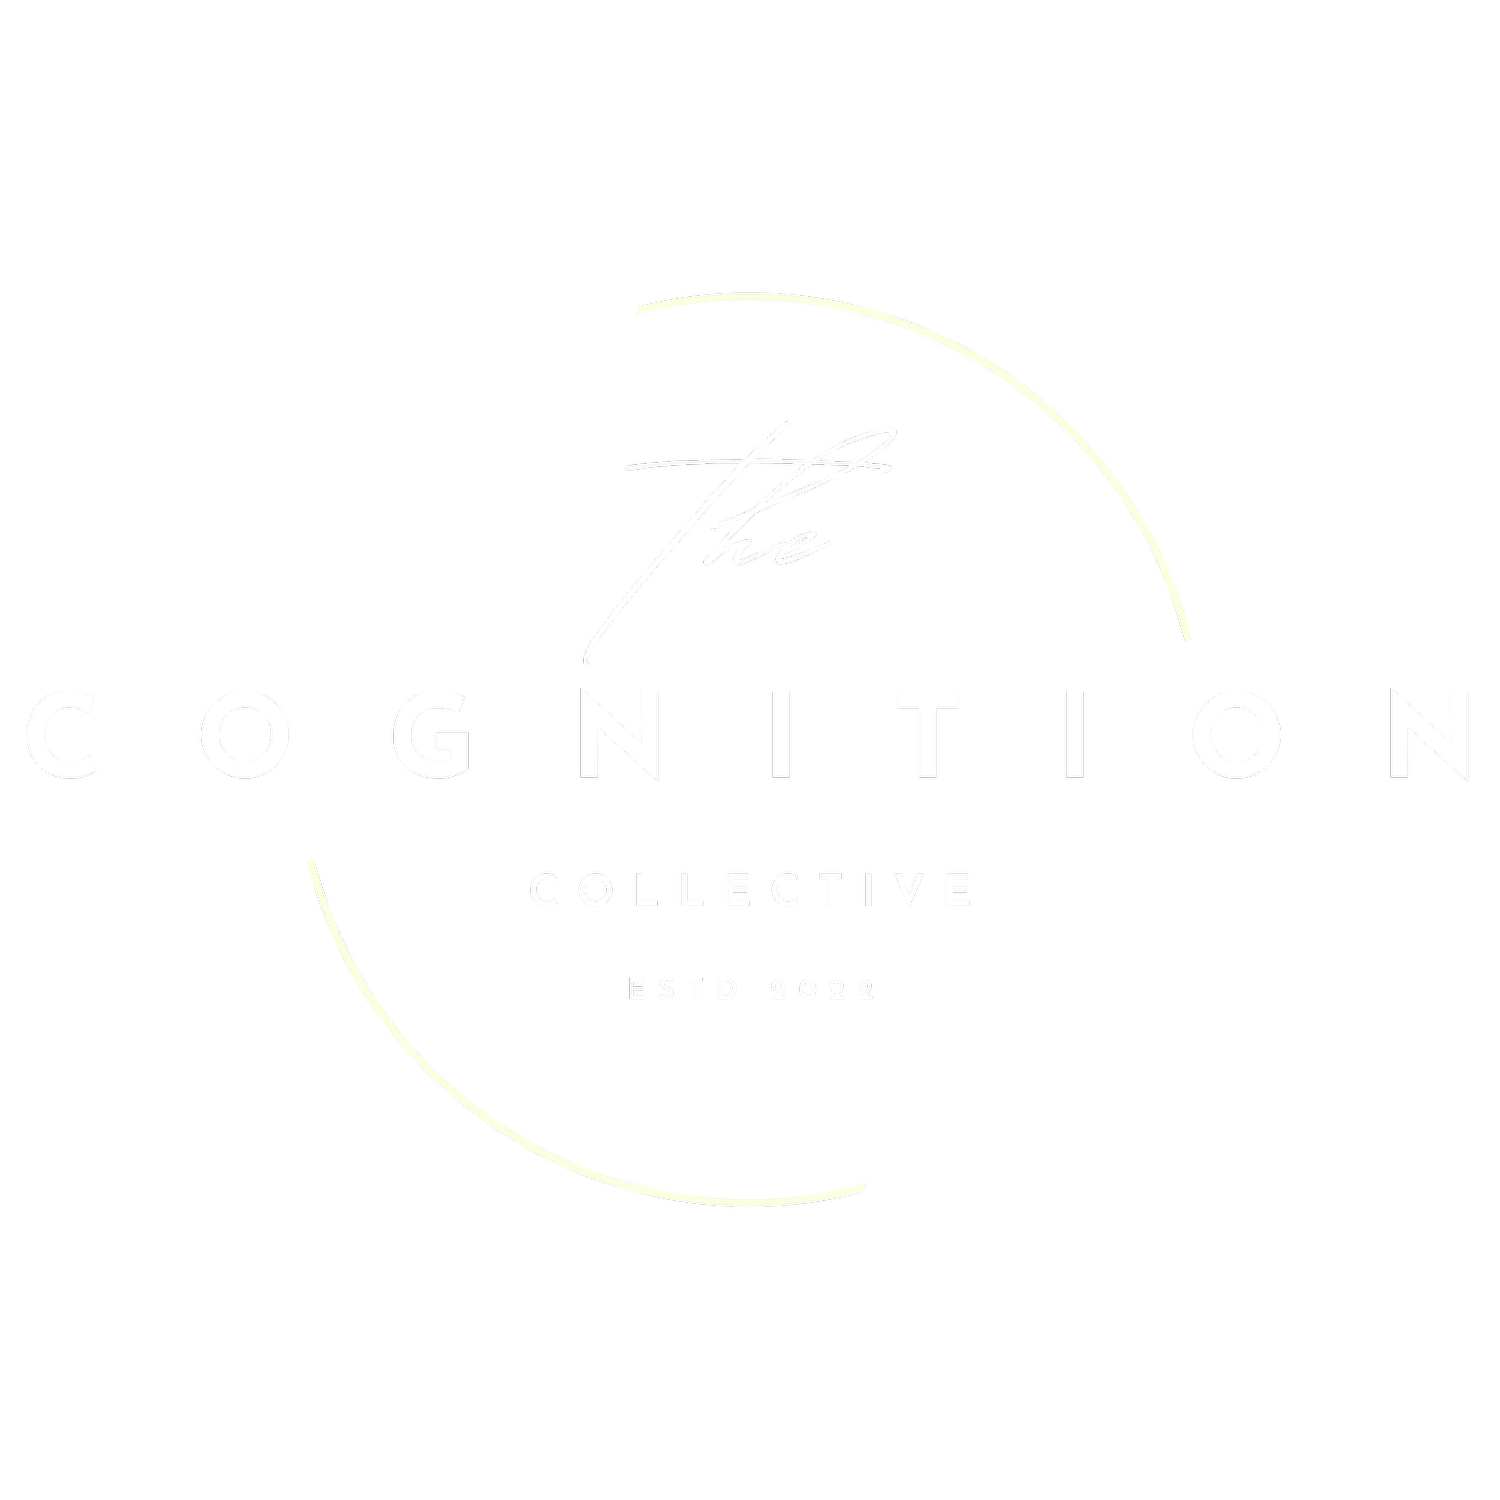 The Cognition Collective